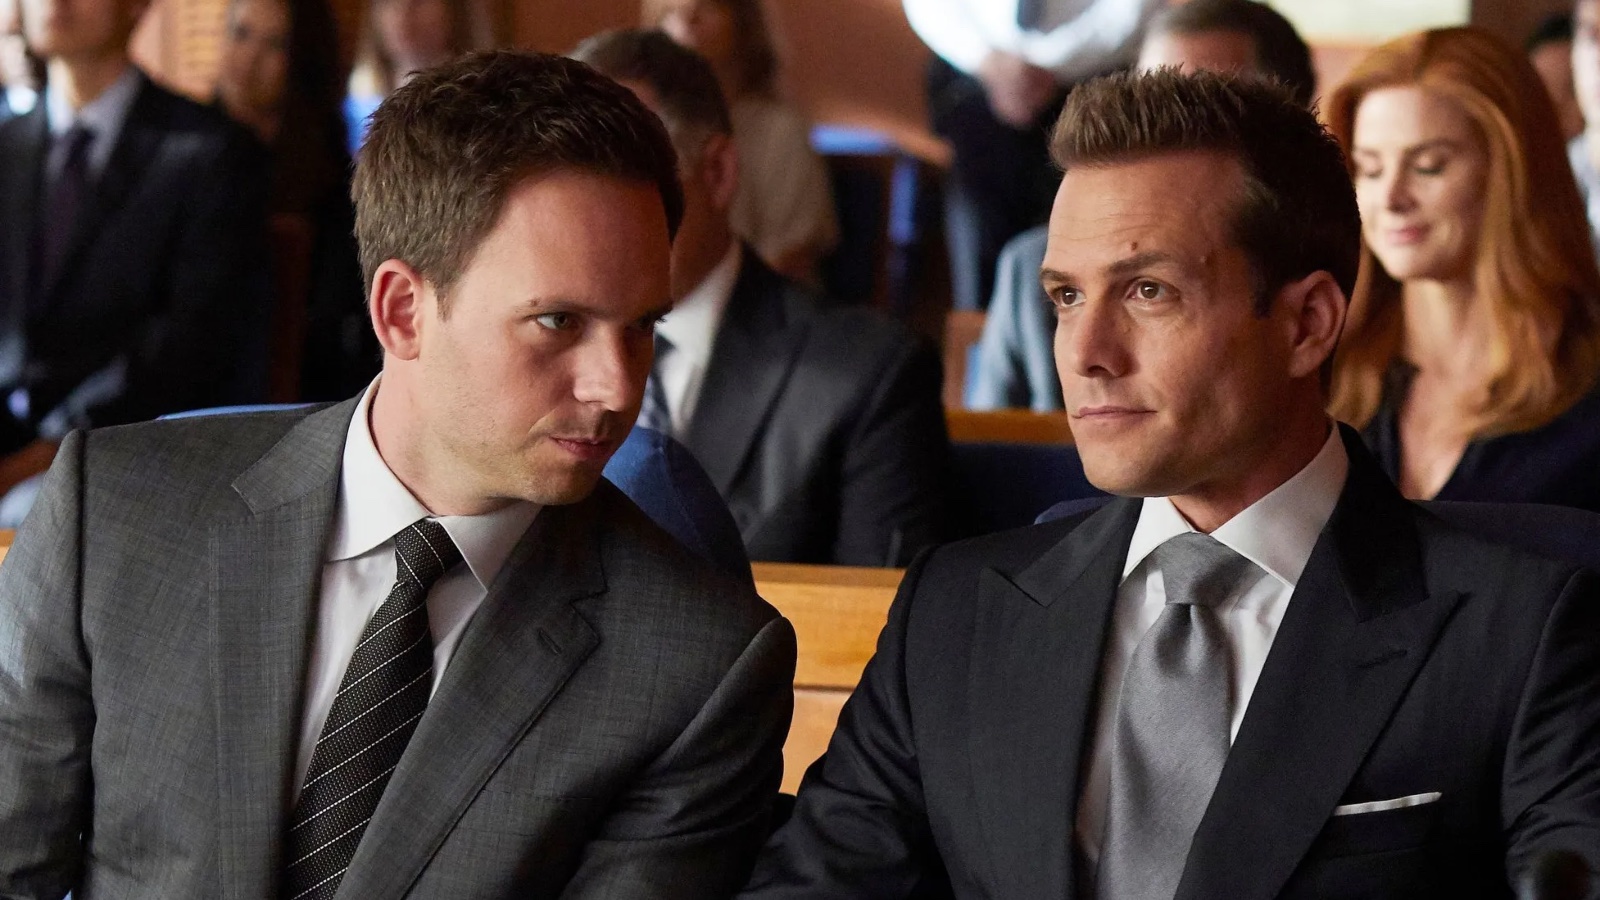 Is 'Suits' a good show to rewatch? - Quora